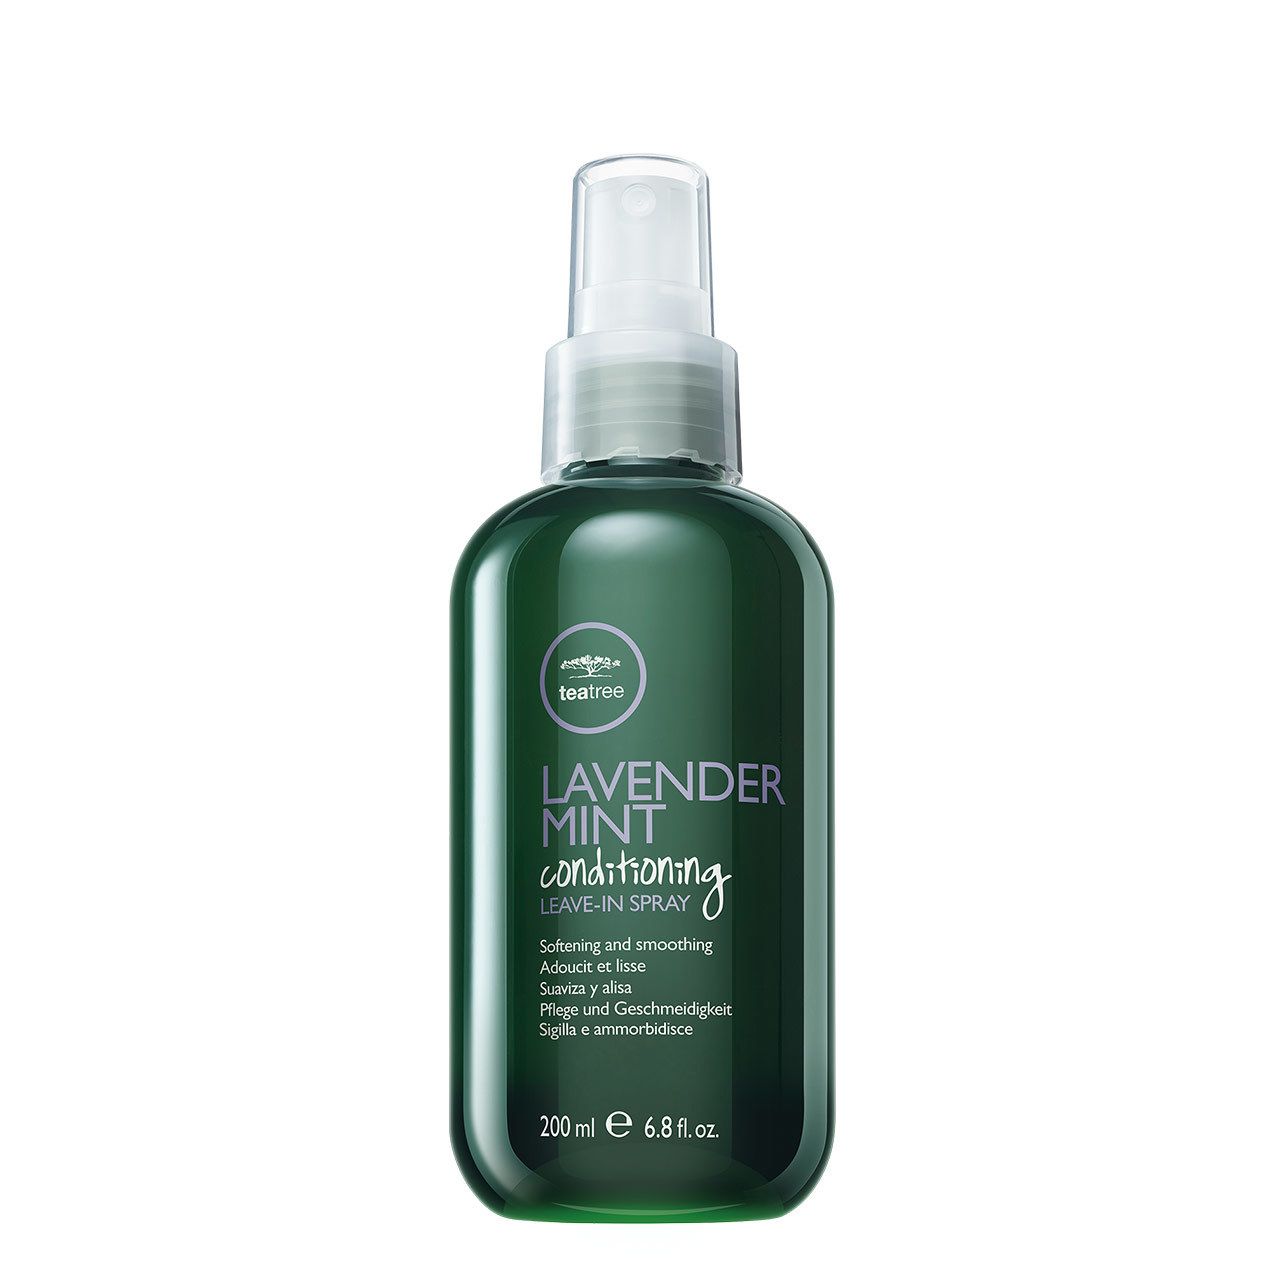 Paul Mitchell Tea Tree Lavender Mint Conditioning Leave-In Spray - 200ml